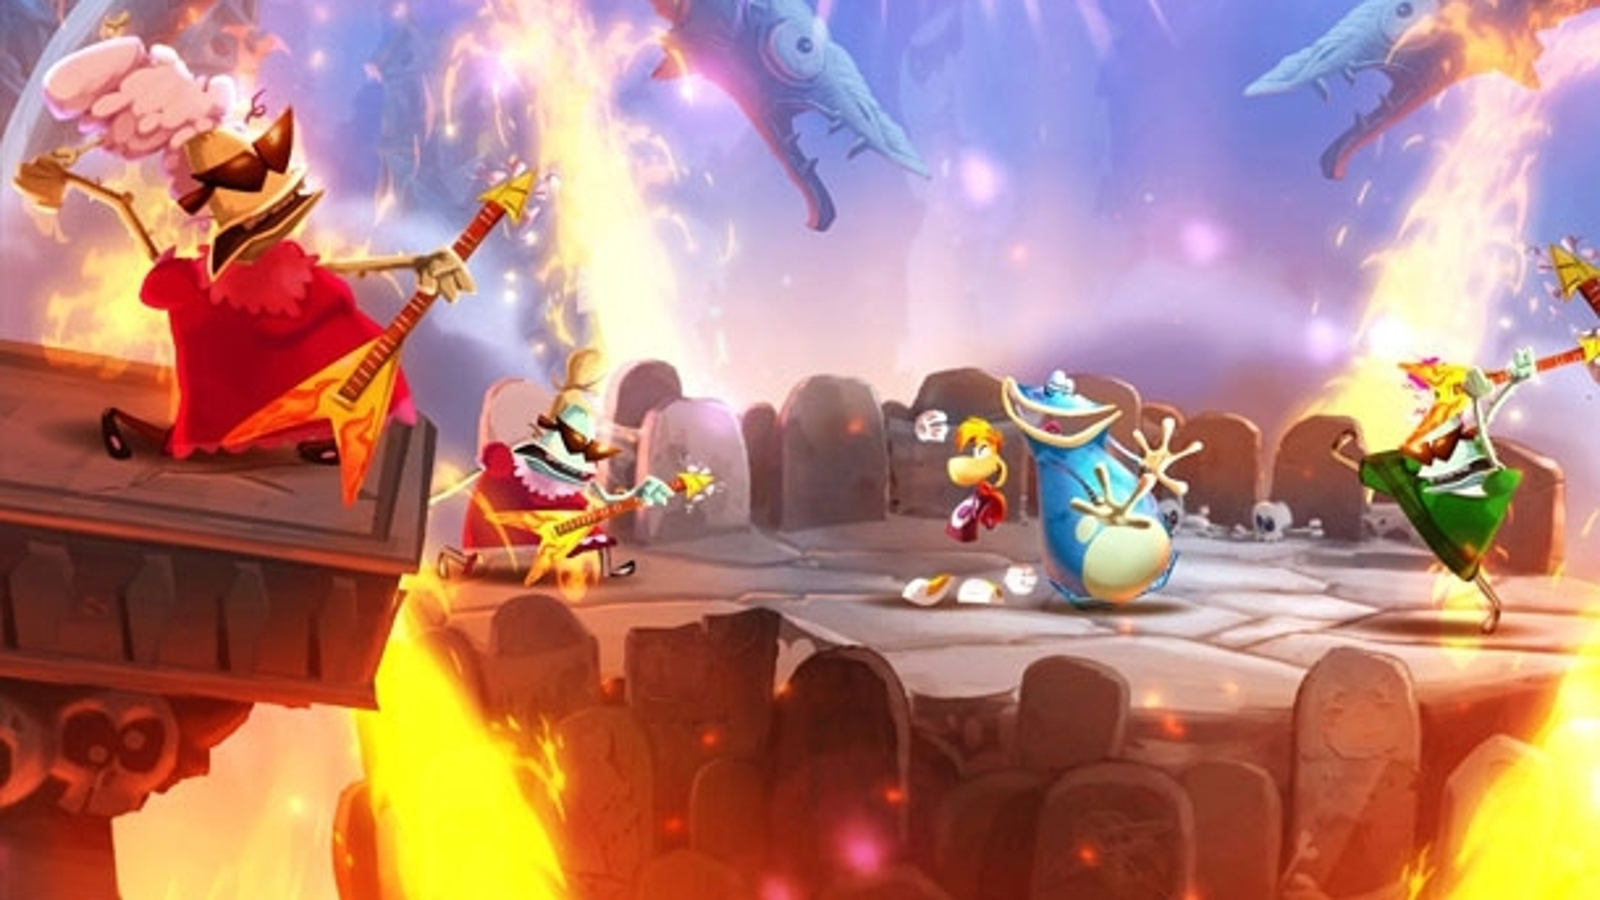 for May include Rayman Legends and Beyond: Two Souls | Eurogamer.net